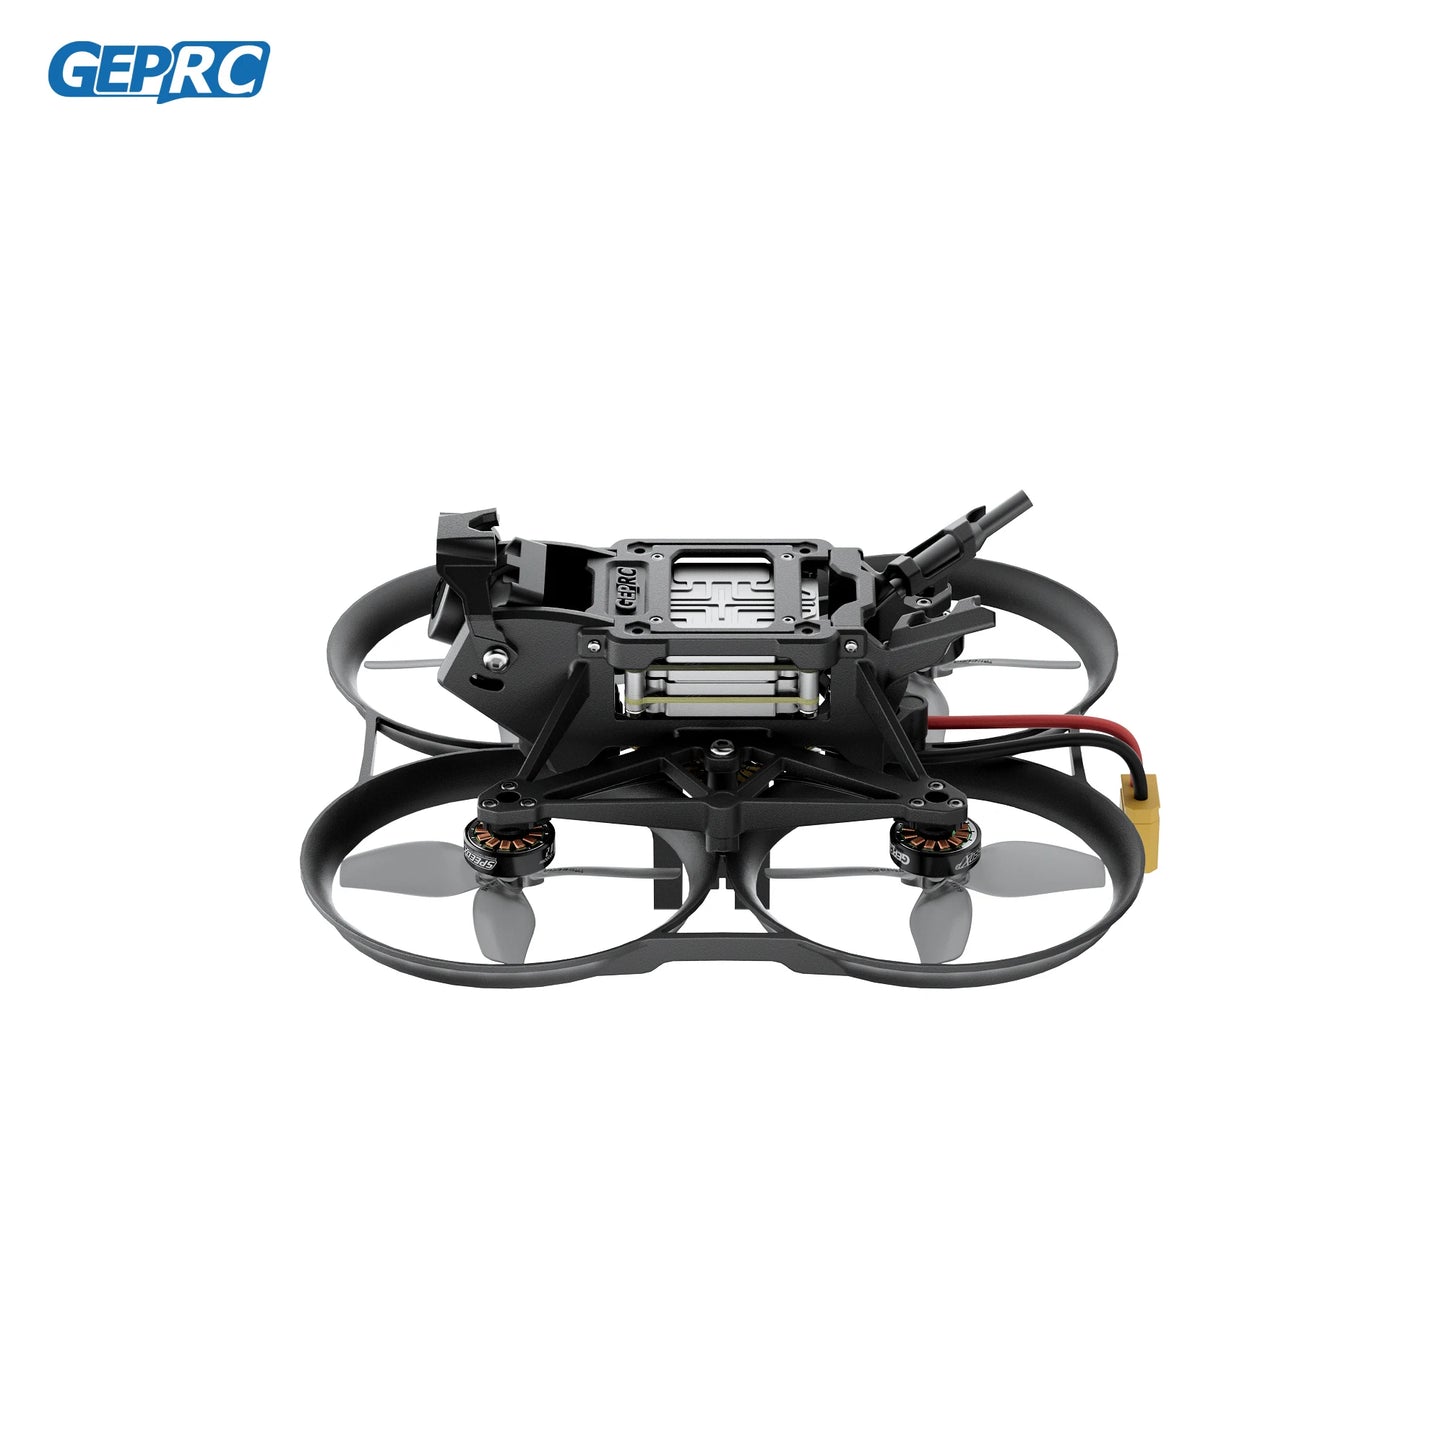 GEPRC DarkStar20 HD Wasp FPV - 2 Inch Mini RC Brushless FPV Racing Drone  Freestyle Quadcopter Drone Rc Airplane